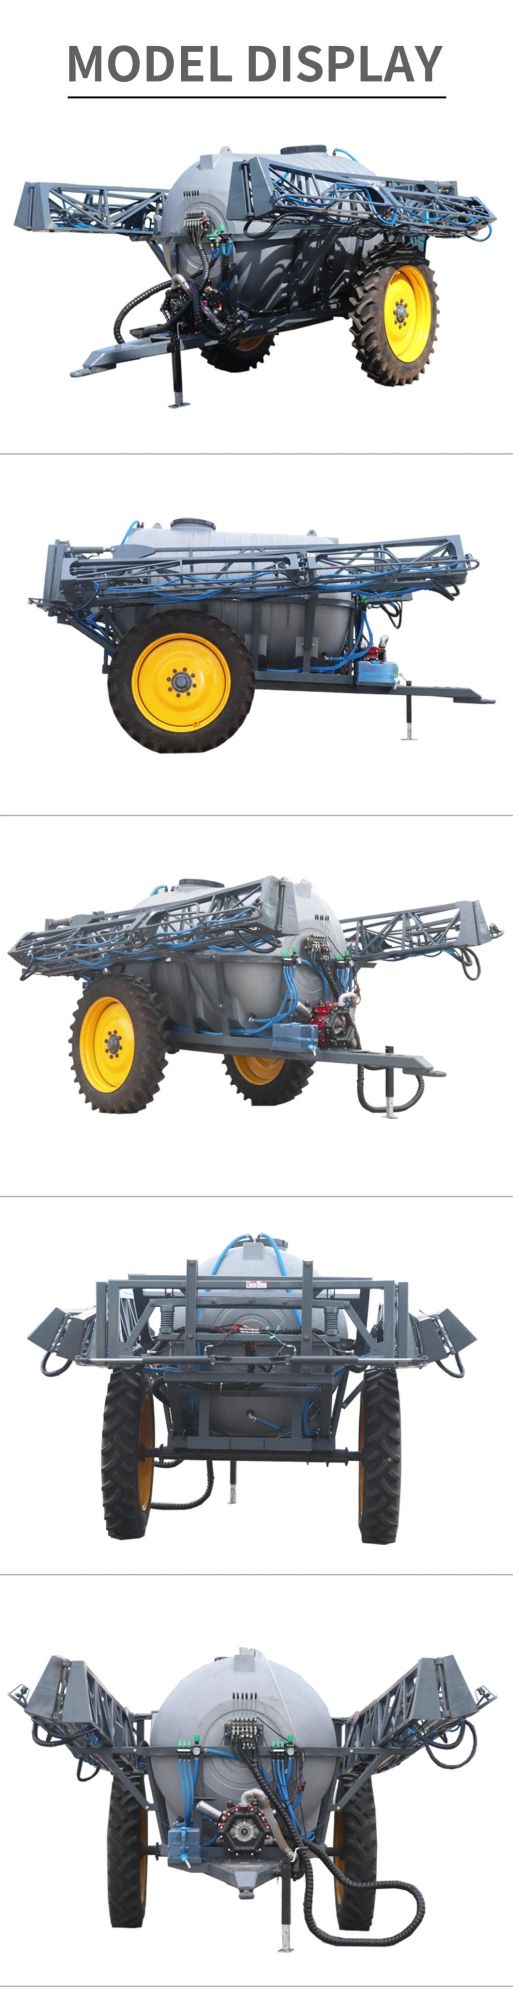 Shaft Drawn Boom Soybean Wheat 4WD Power Agricultural Self Propelled Tractor Sprayer